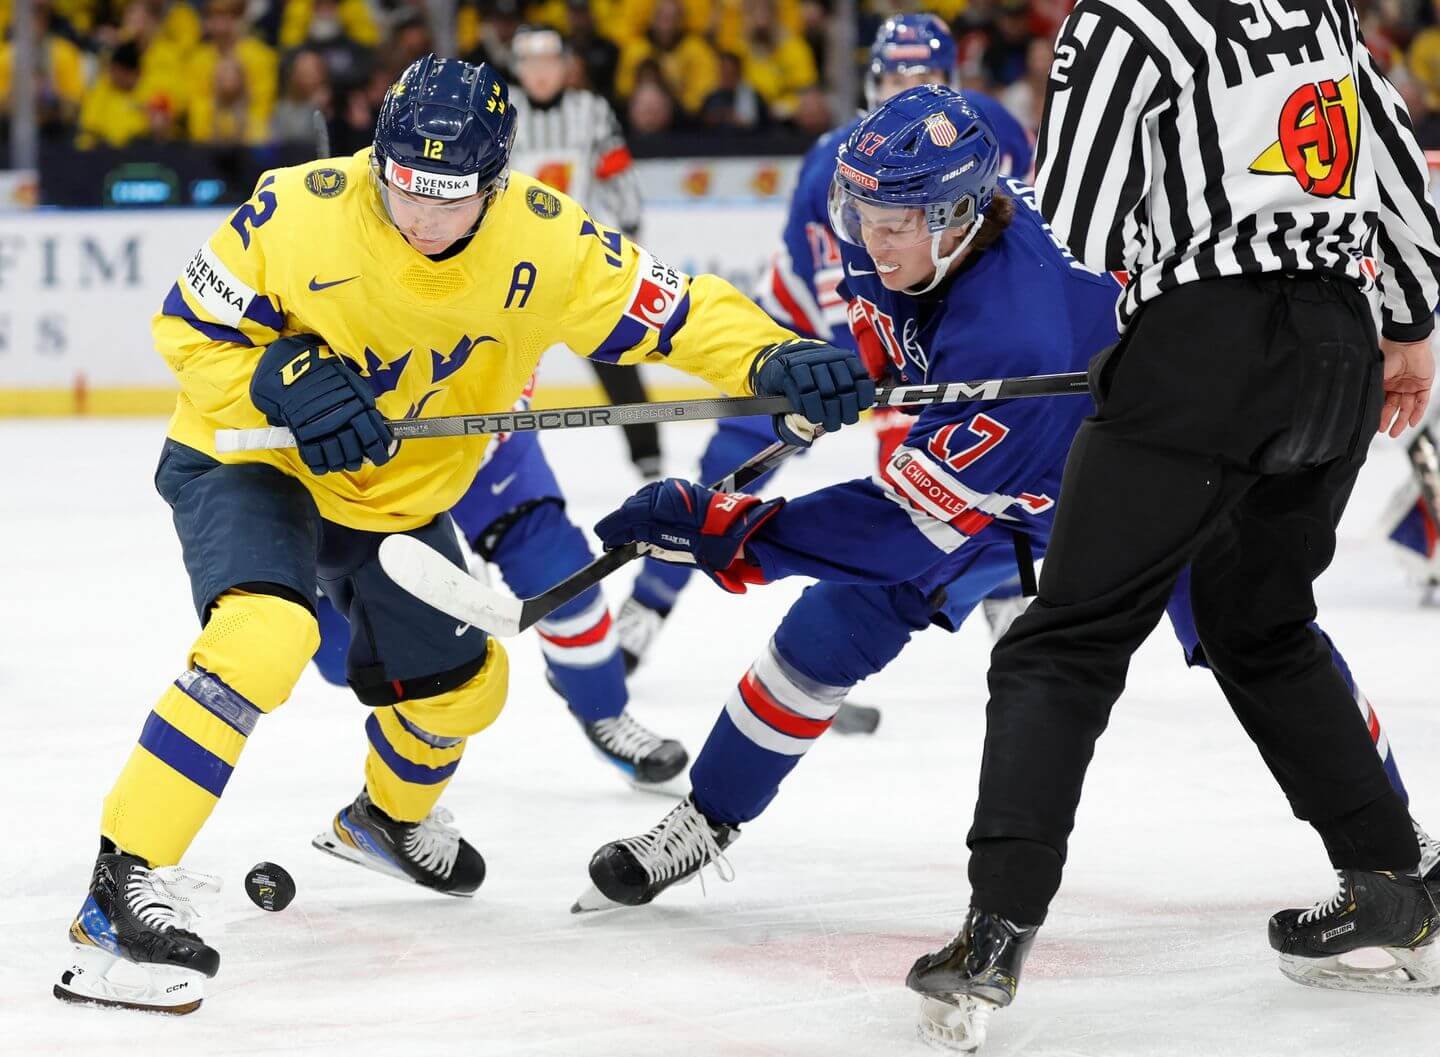 U.S. vs. Sweden score, world juniors gold medal game live updates: Isaac Howard gives USA a 2-1 lead in the second period